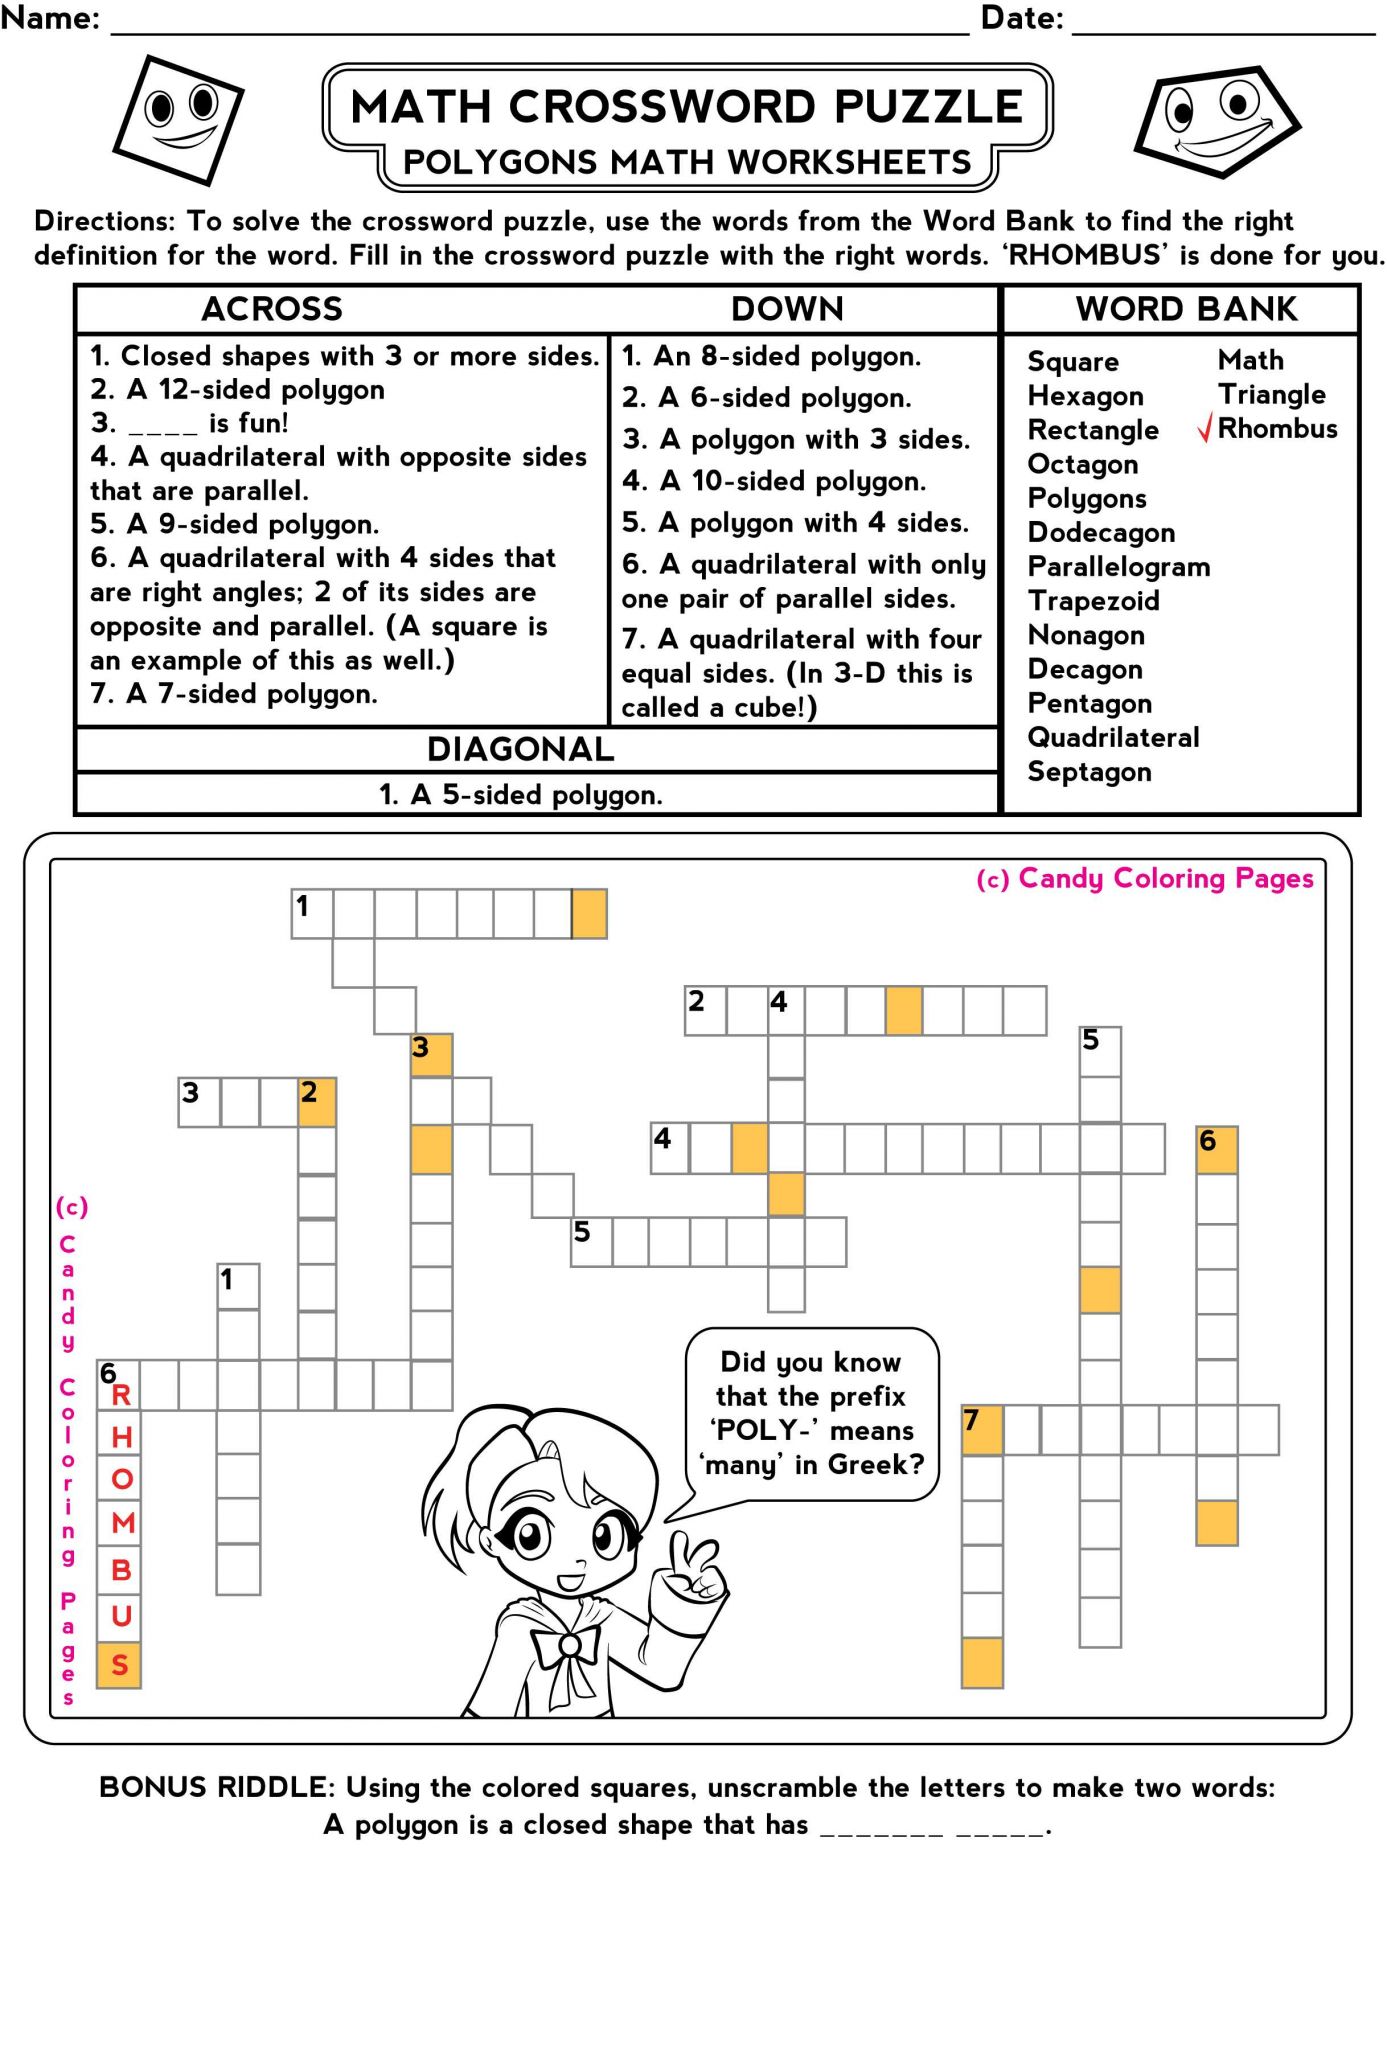 Following Directions Worksheet Middle School or Math Word Crossword Puzzles the Best Worksheets Image Collection